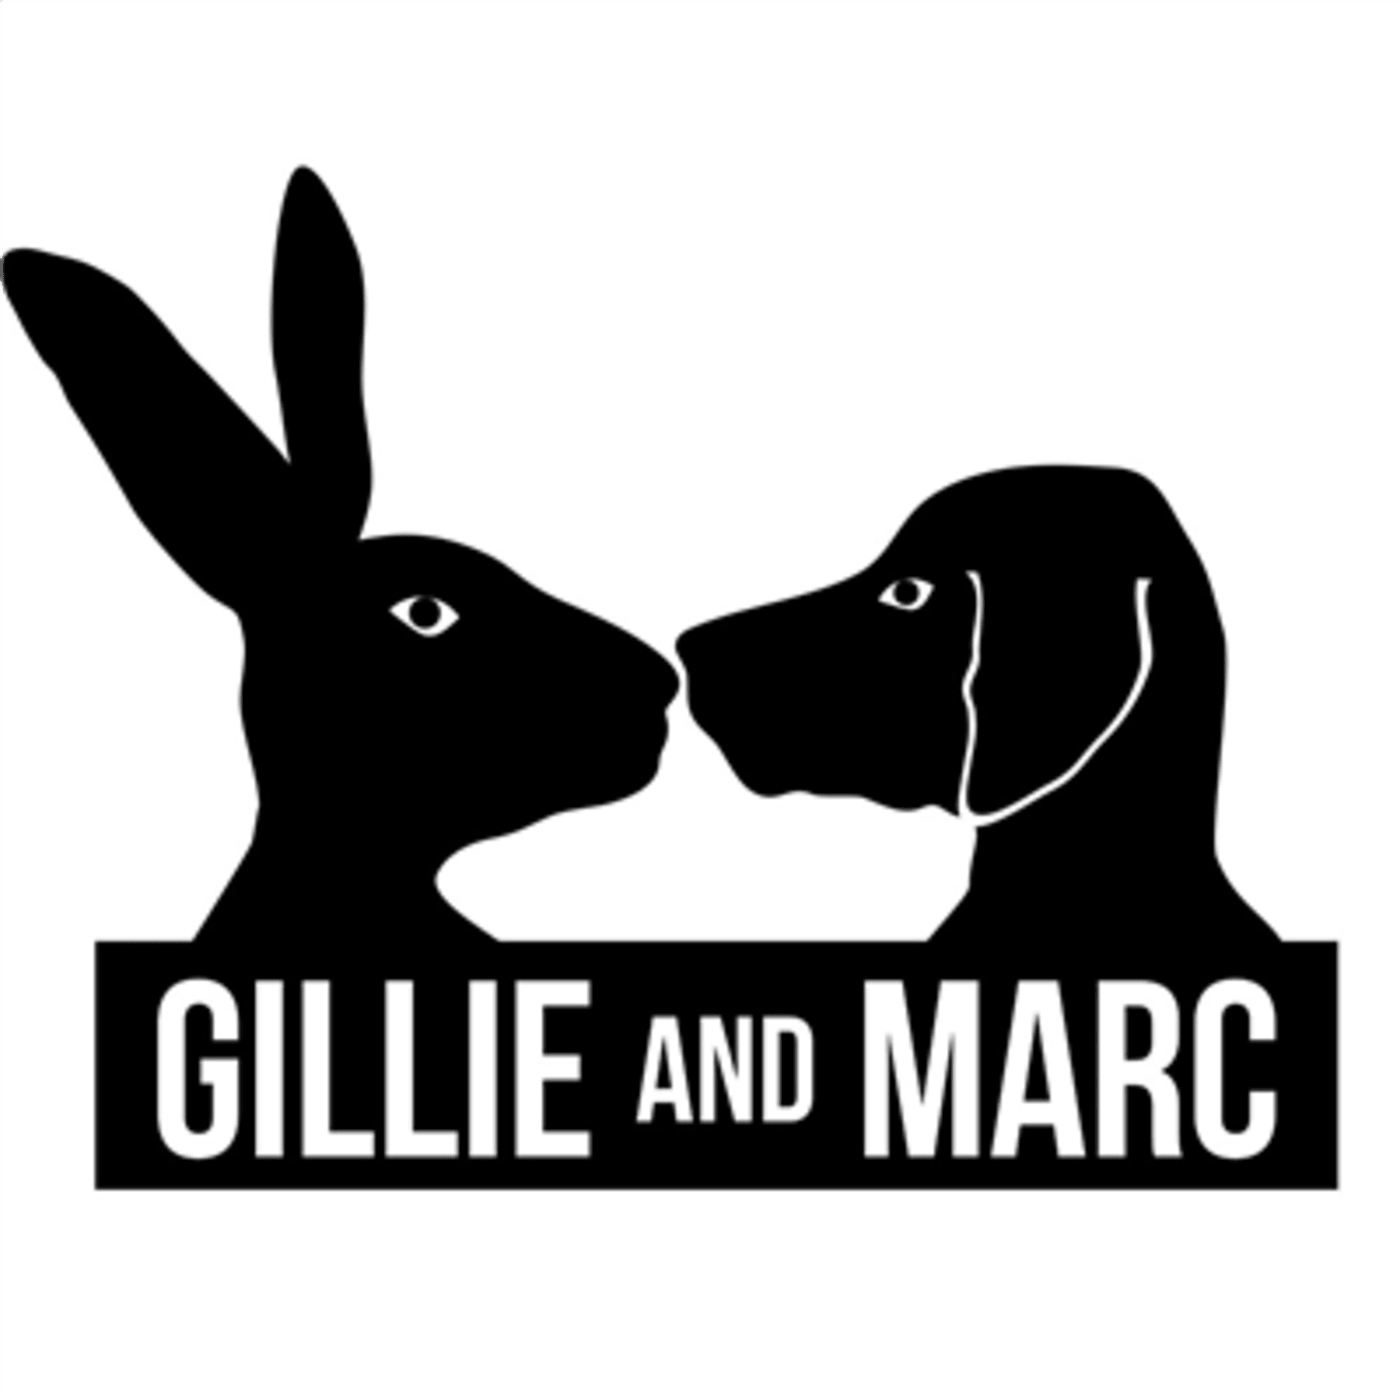 Gillie and Marc logo